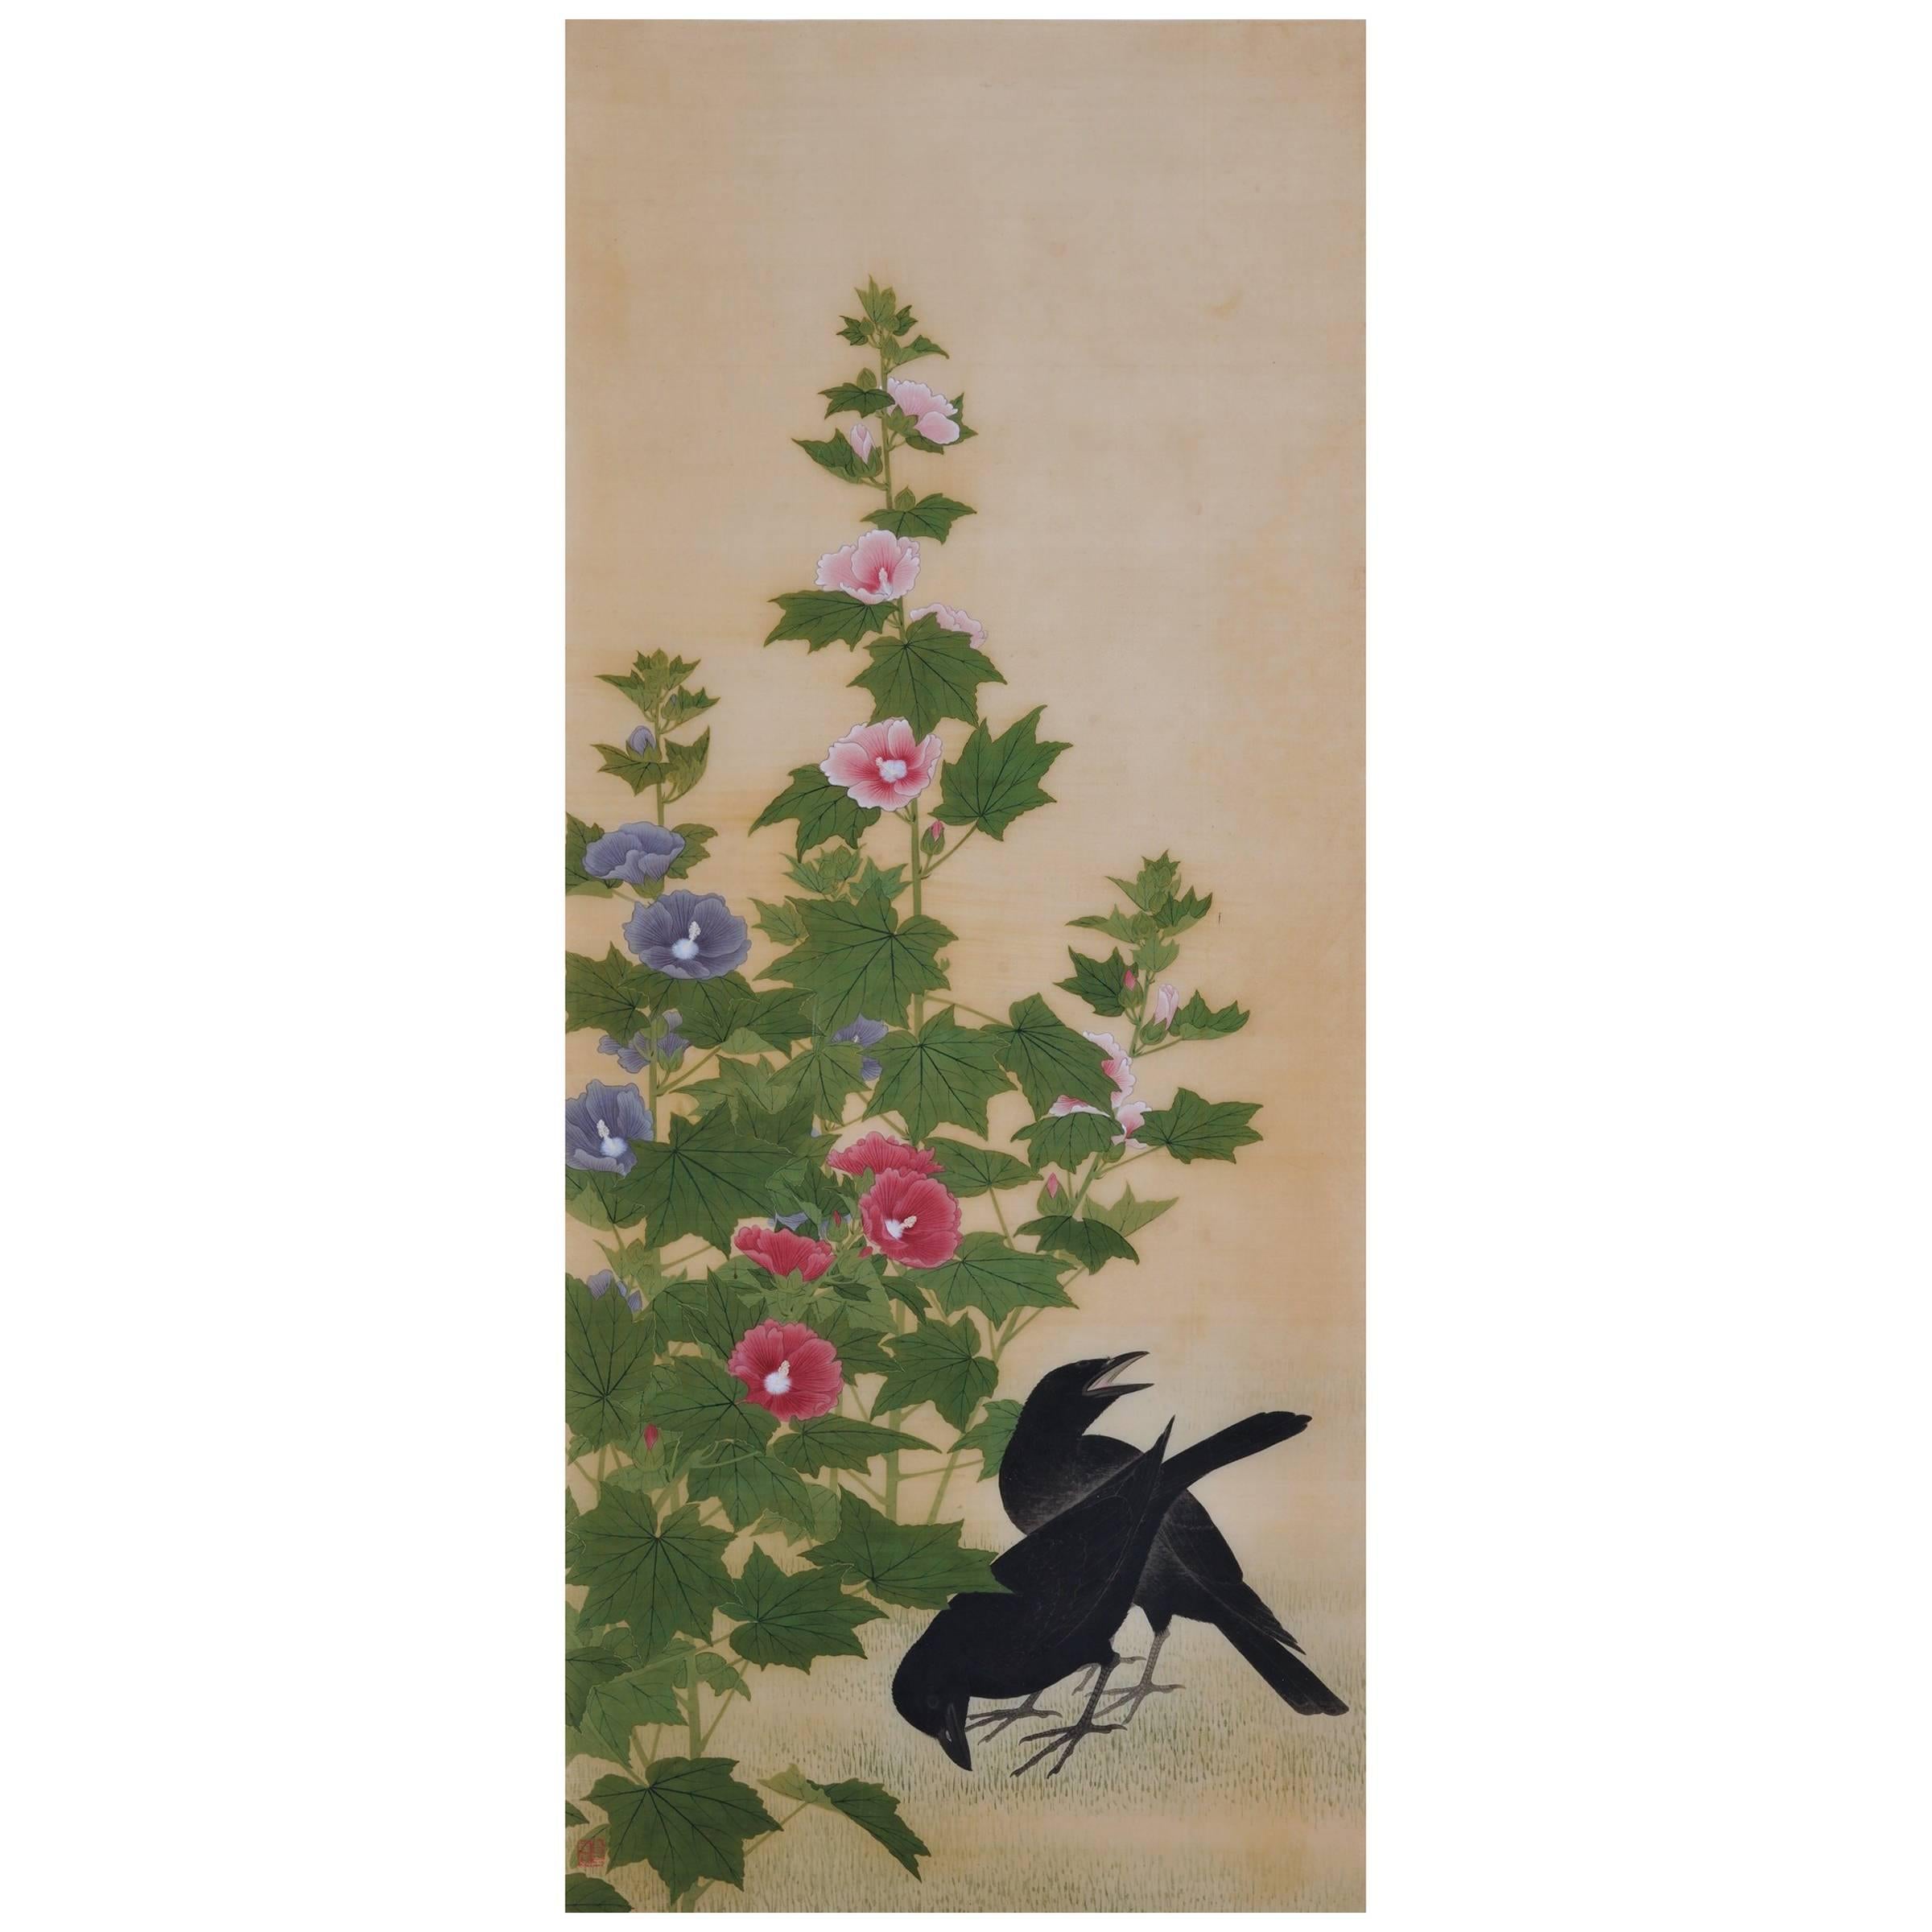 19th Century Japanese Bird and Flower Painting, Ravens and Hibiscus